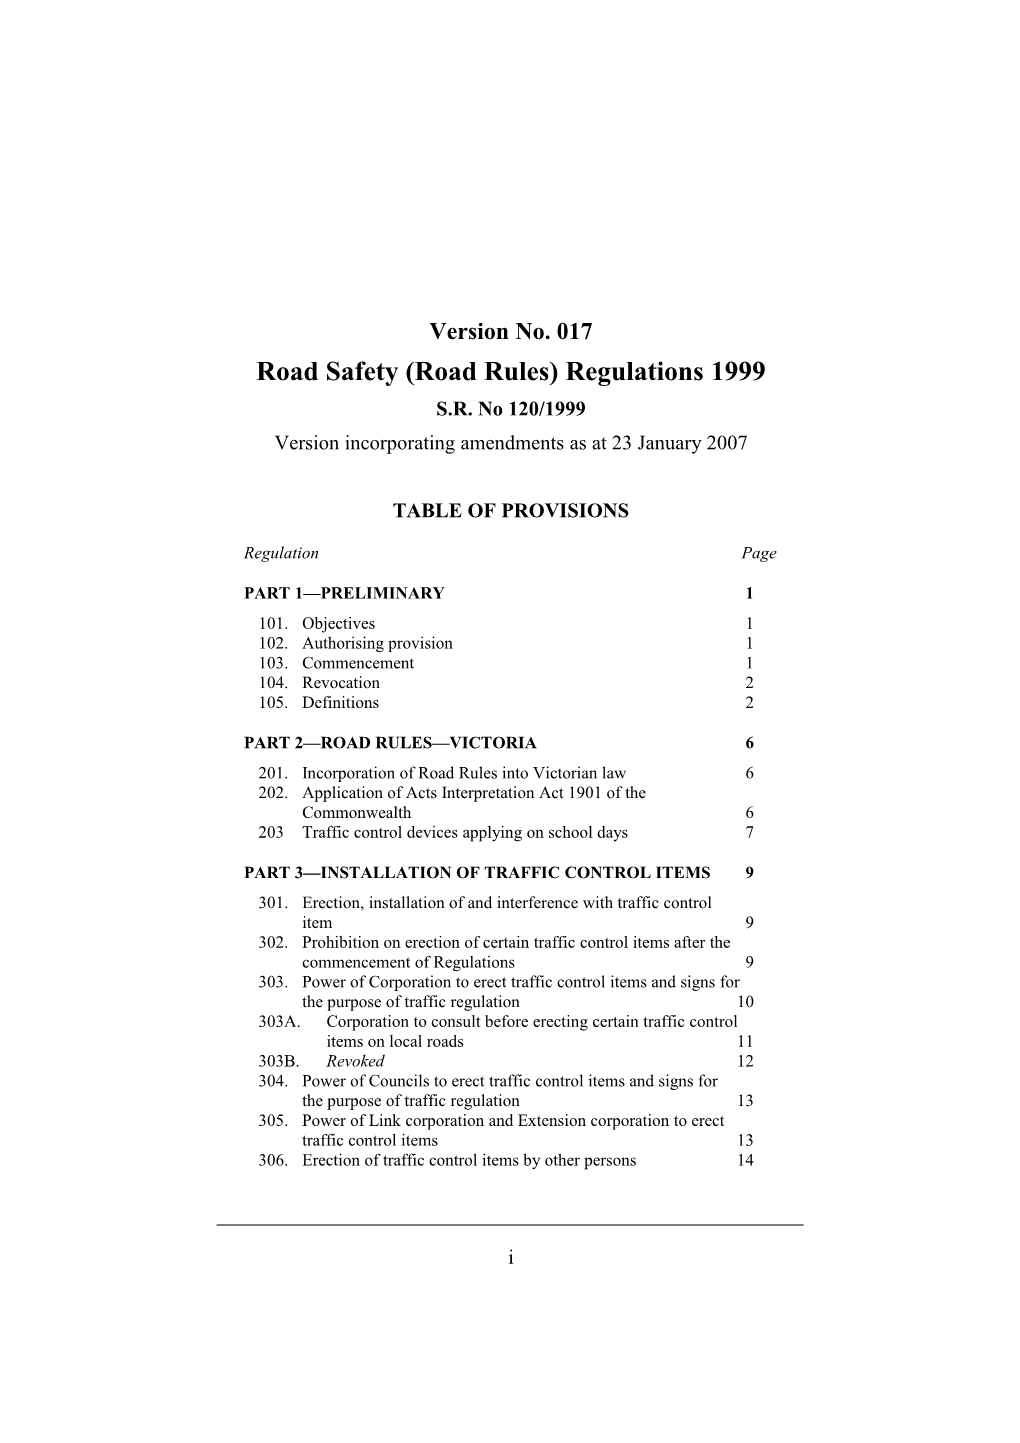 Road Safety (Road Rules) Regulations 1999